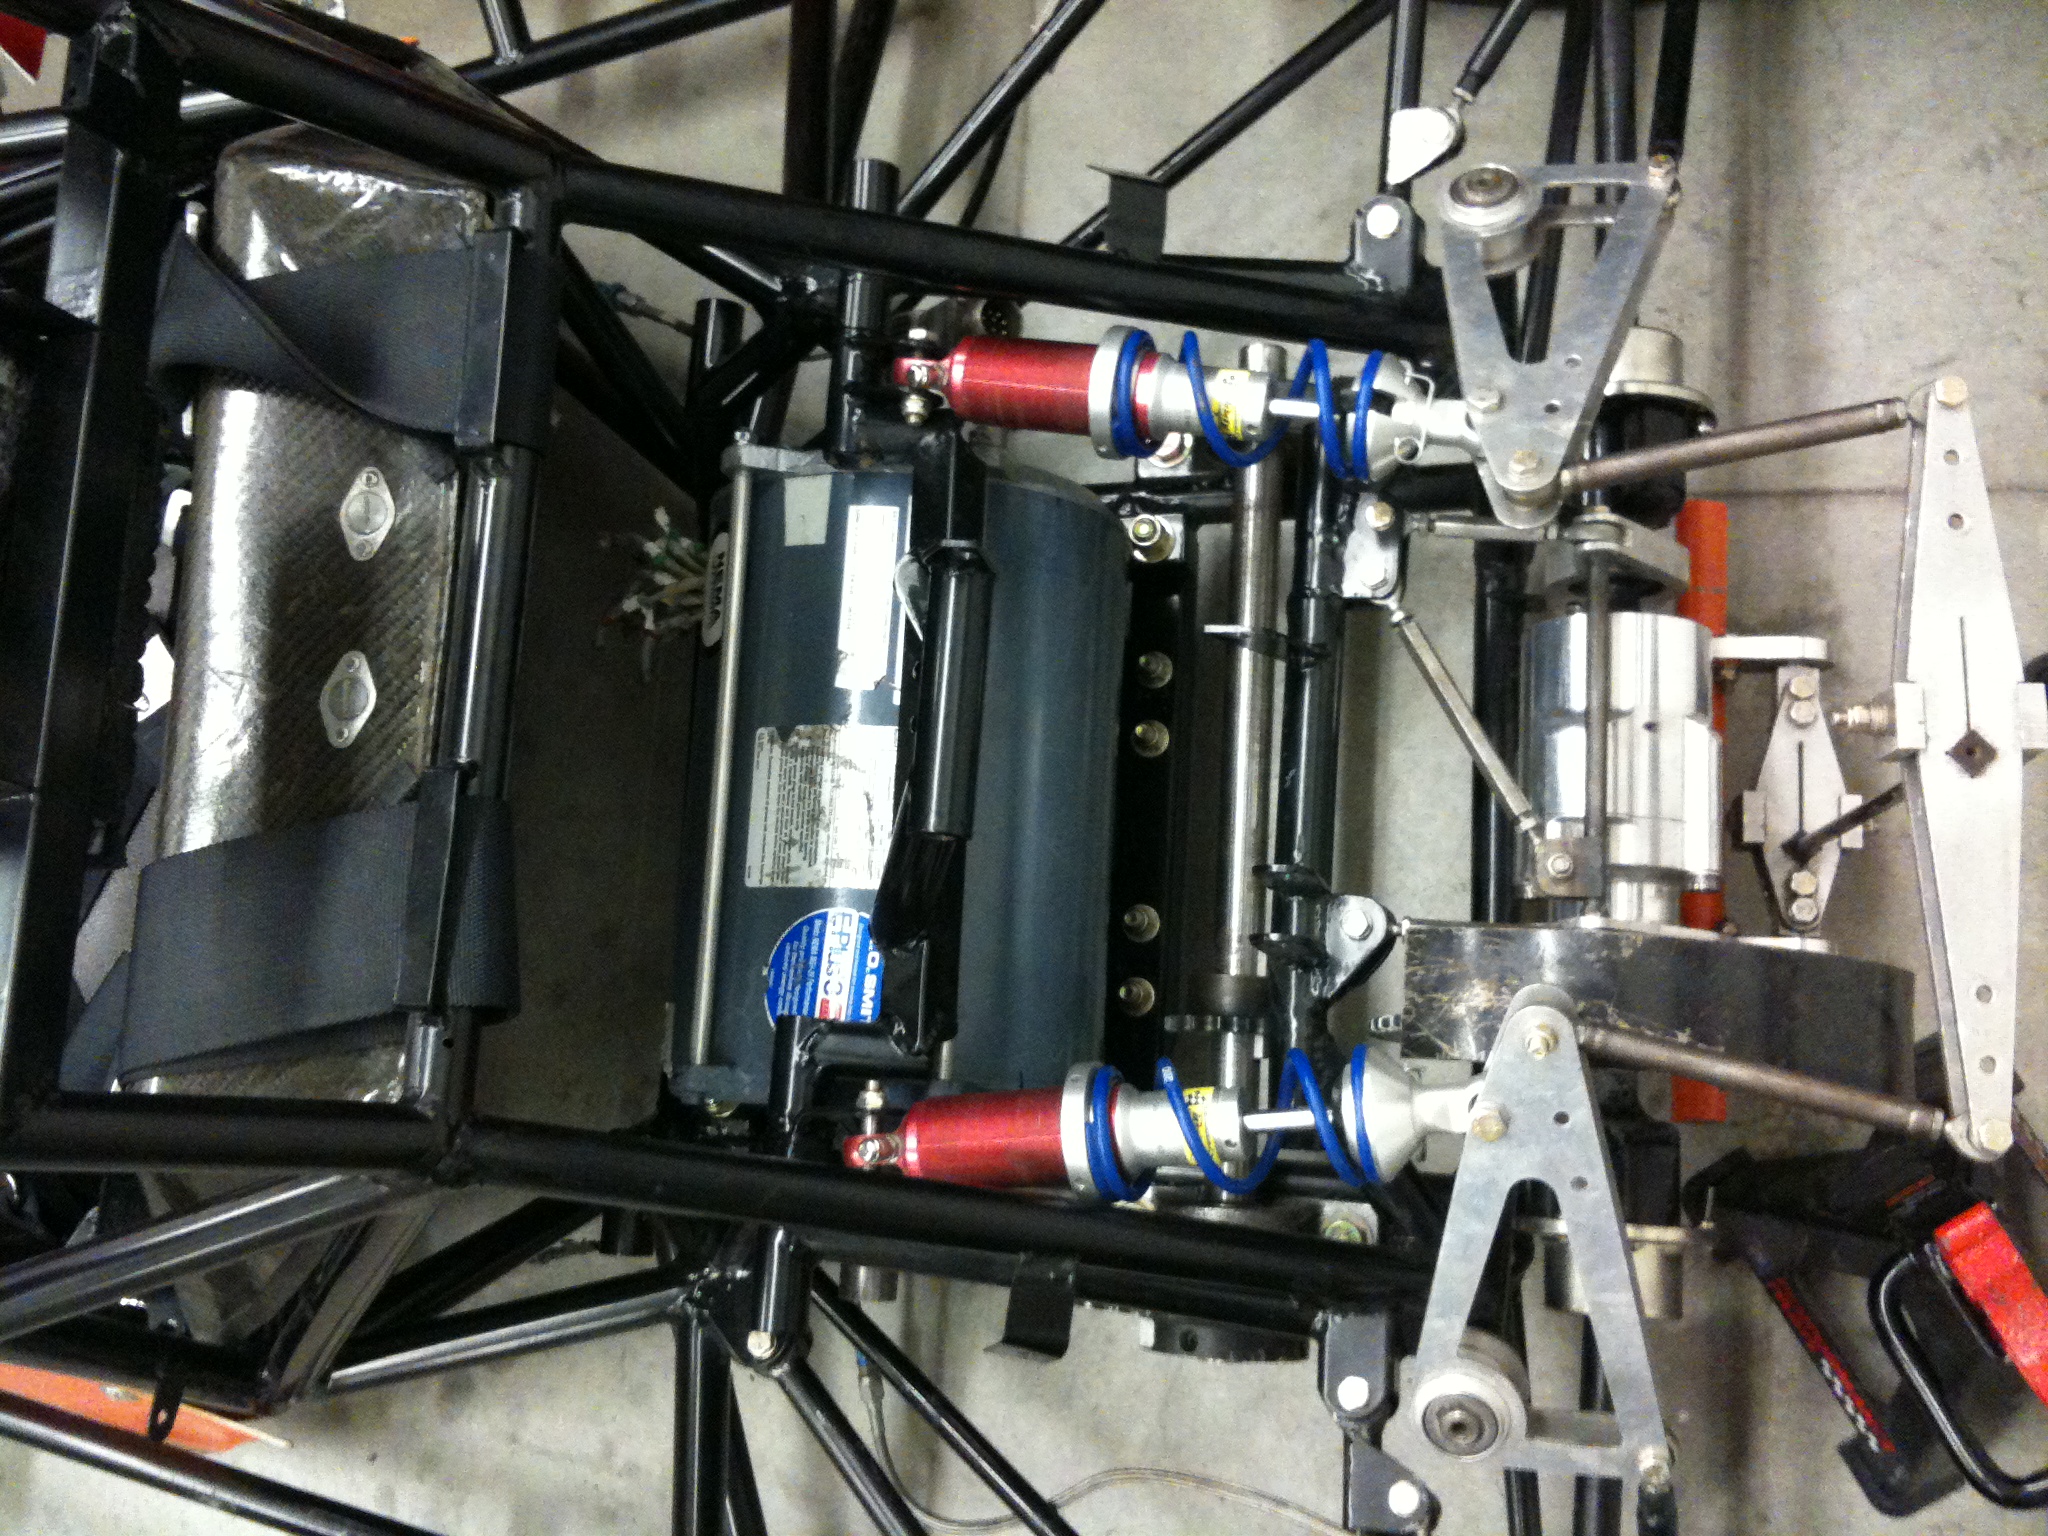  Rear end of the car during assembly - top view 